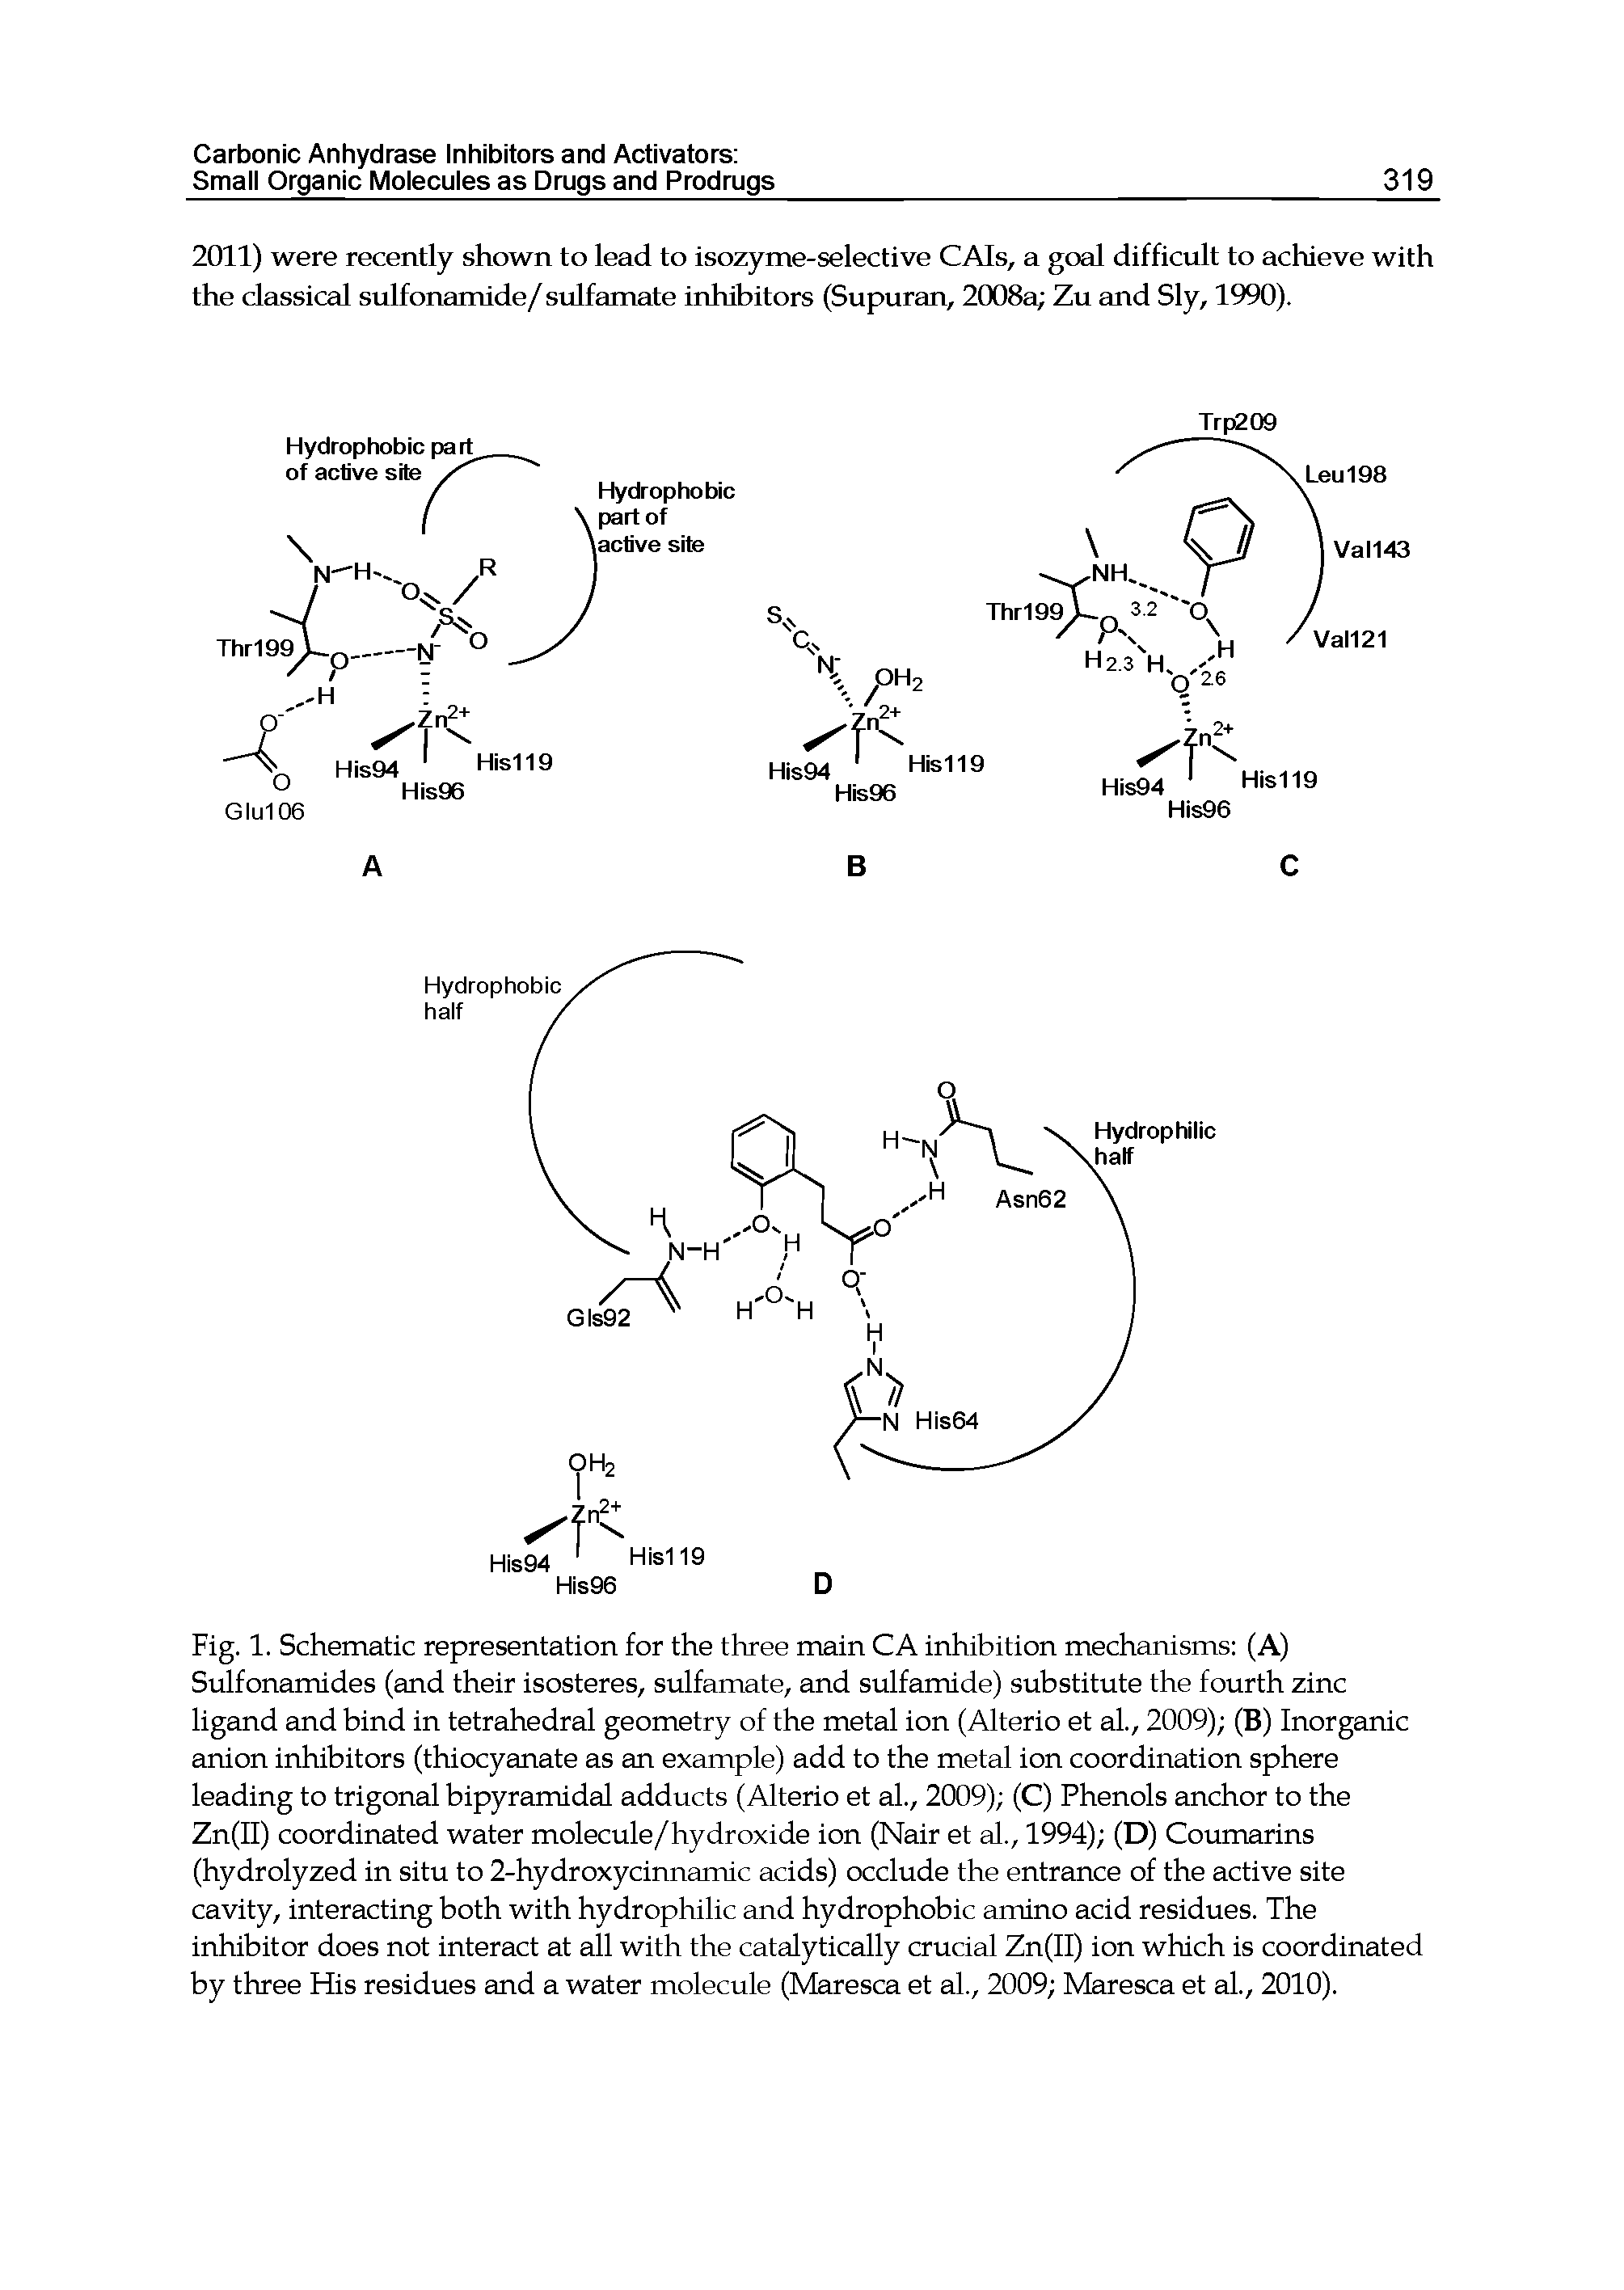 Fig. 1. Schematic representation for the three main CA inhibition mechanisms (A) Sulfonamides (and their isosteres, sulfamate, and sulfamide) substitute the fourth zinc ligand and bind in tetrahedral geometry of the metal ion (Alterio et al., 2009) (B) Inorganic anion inhibitors (thiocyanate as an example) add to the metal ion coordination sphere leading to trigonal bipyramidal adducts (Alterio et al., 2009) (C) Phenols anchor to the Zn(II) coordinated water molecule/hydroxide ion (Nair et al., 1994) (D) Coumarins (hydrolyzed in situ to 2-hydroxycinnamic acids) occlude the entrance of the active site cavity, interacting both with hydrophilic and hydrophobic amino acid residues. The inhibitor does not interact at all with the catalytically crucial Zn(II) ion which is coordinated by three His residues and a water molecule (Maresca et al, 2009 Maresca et al., 2010).